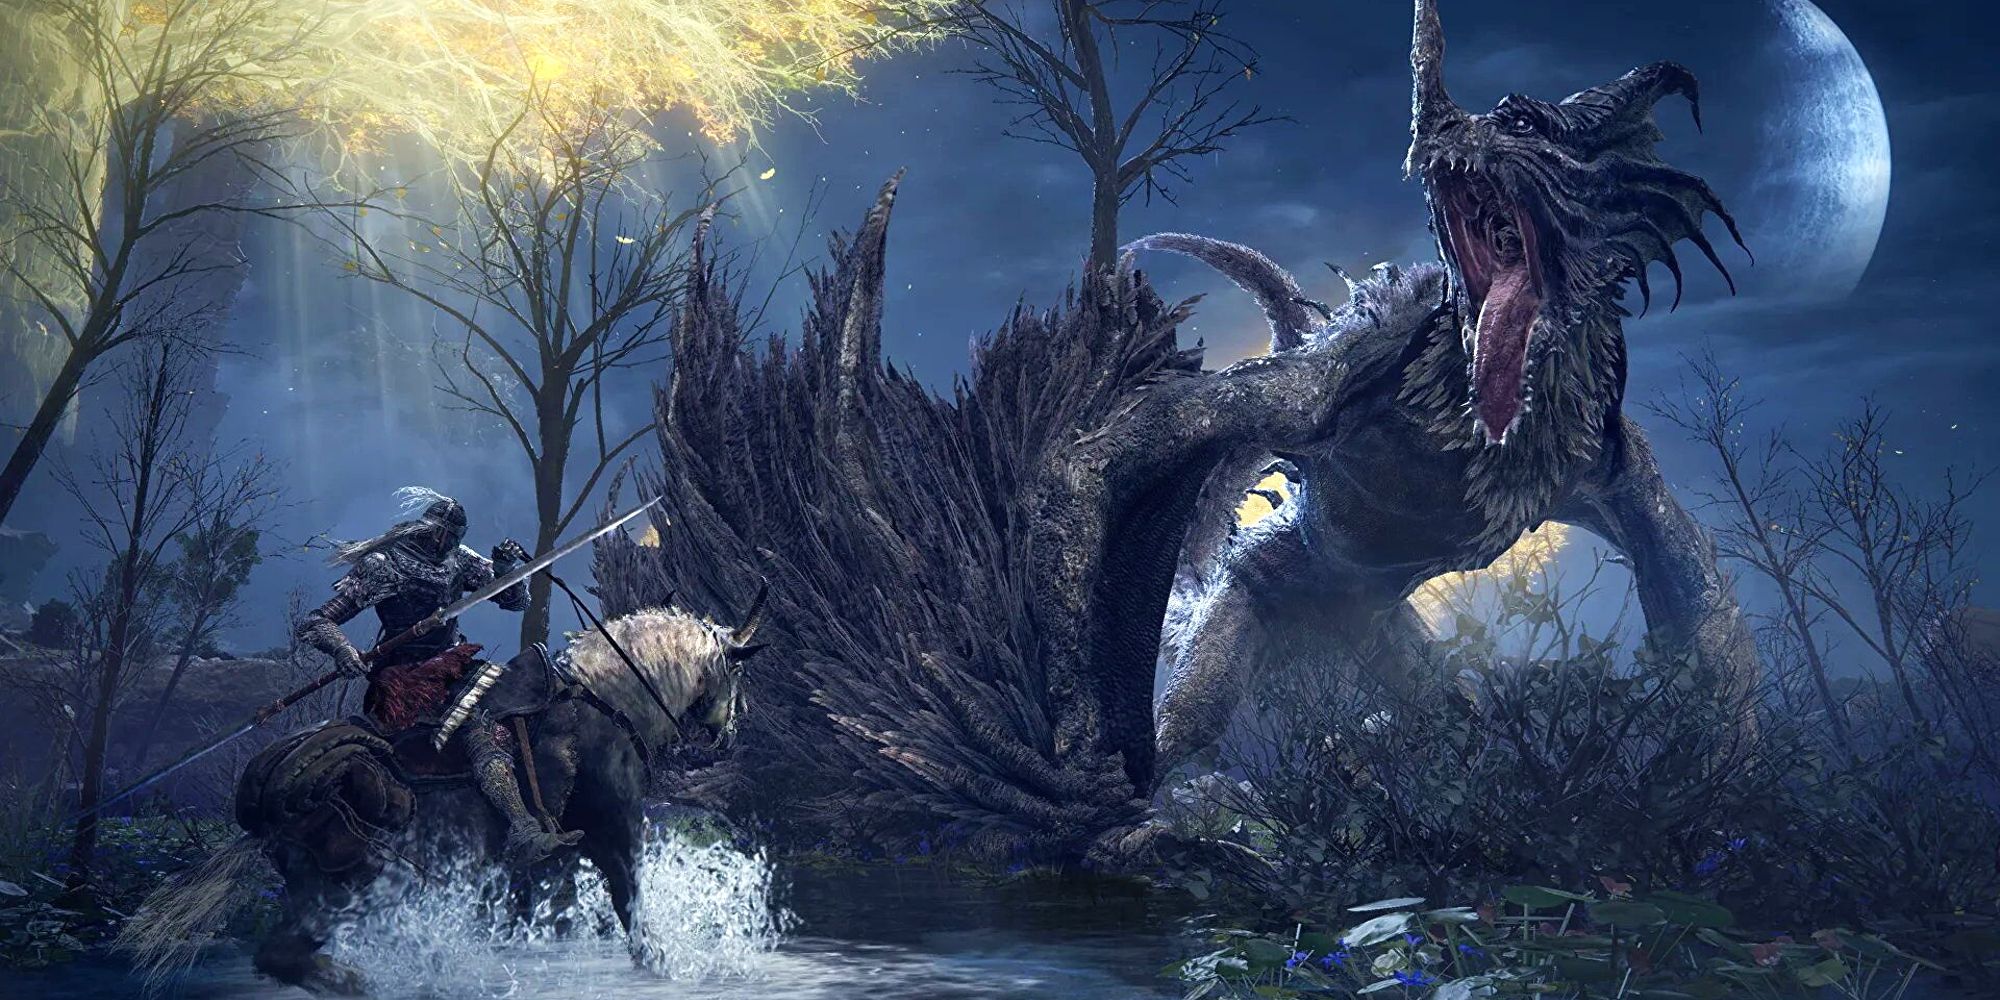 Promotional artwork for Elden Ring showing the Tarnished on Torrent, wielding a twin blade and facing down a roaring dragon. A crescent moon is in the night sky and the golden branches of the Erdtree glow above.